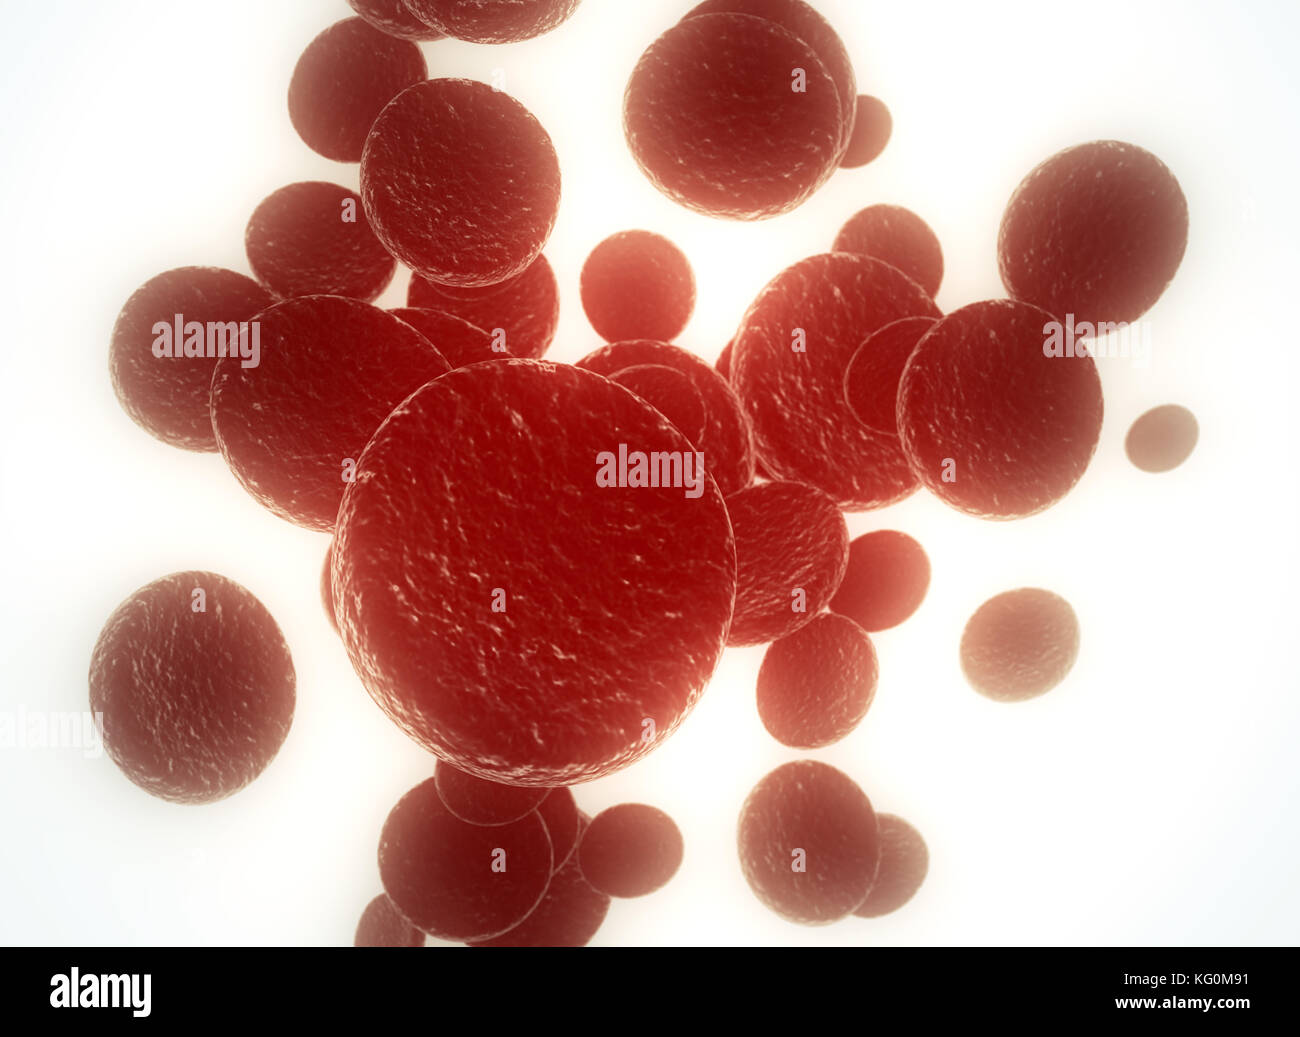 Flow of blood cells back lit Stock Photo